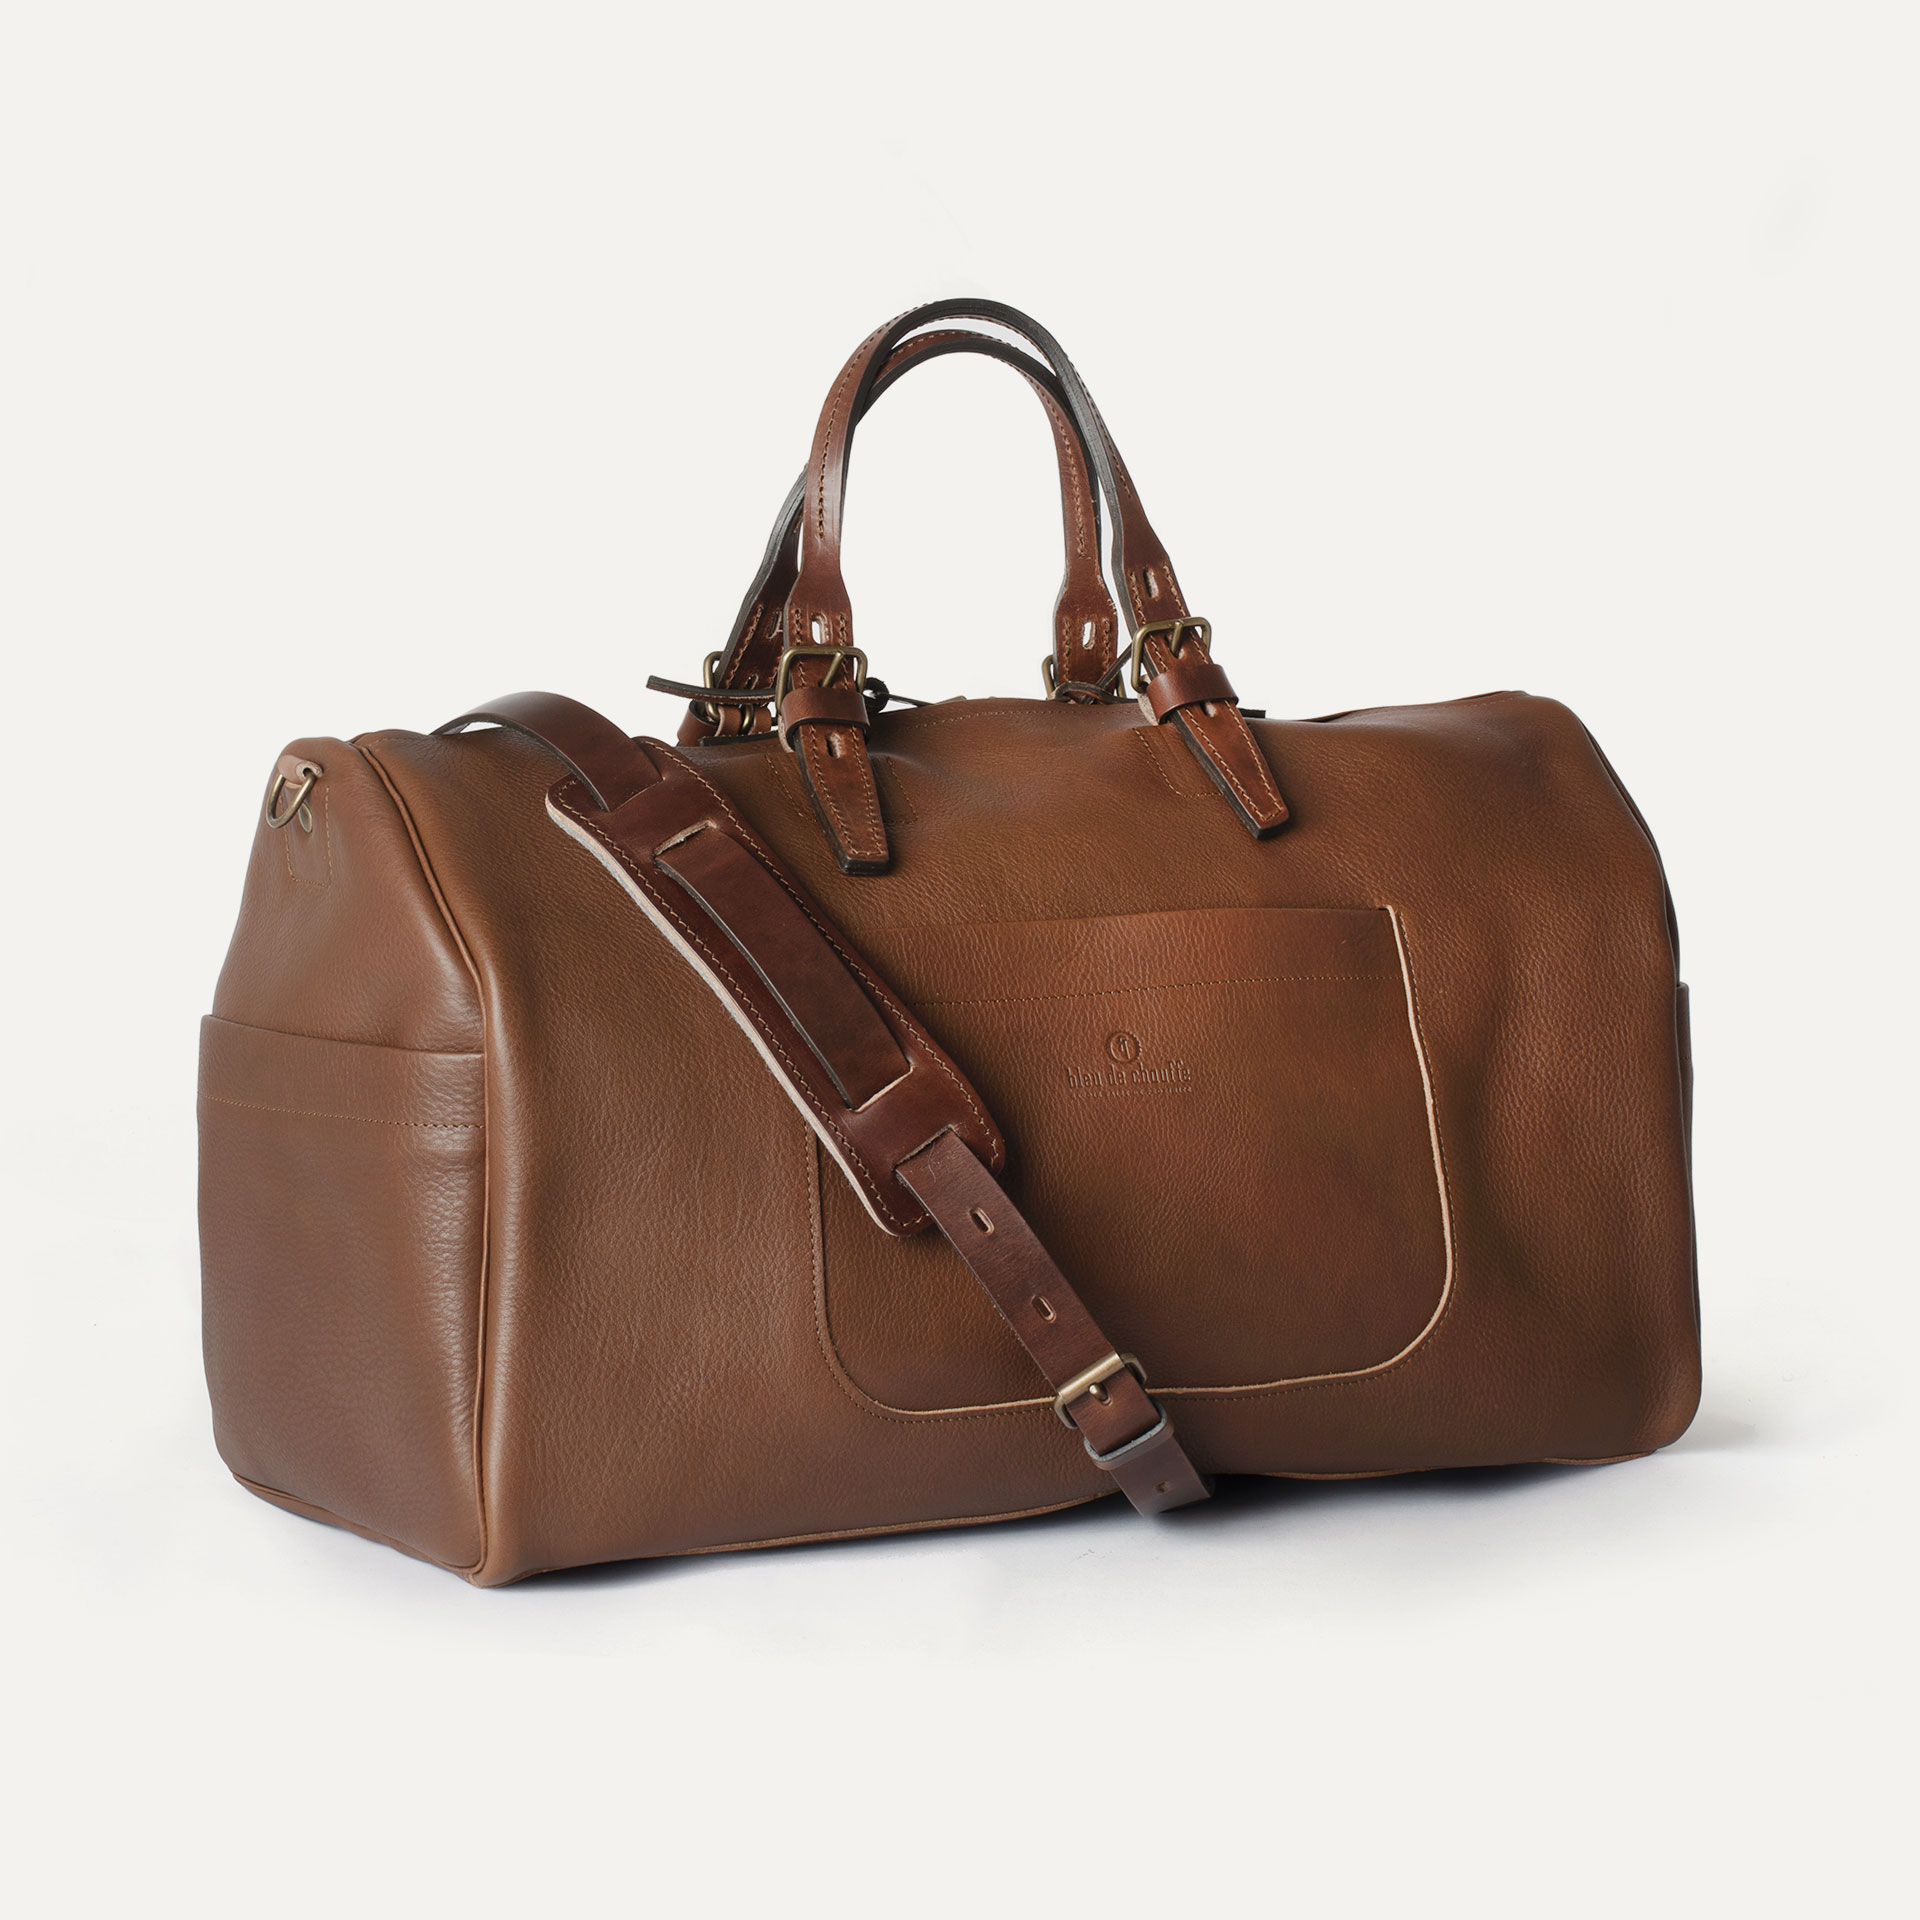 Handcrafted leather travel bag